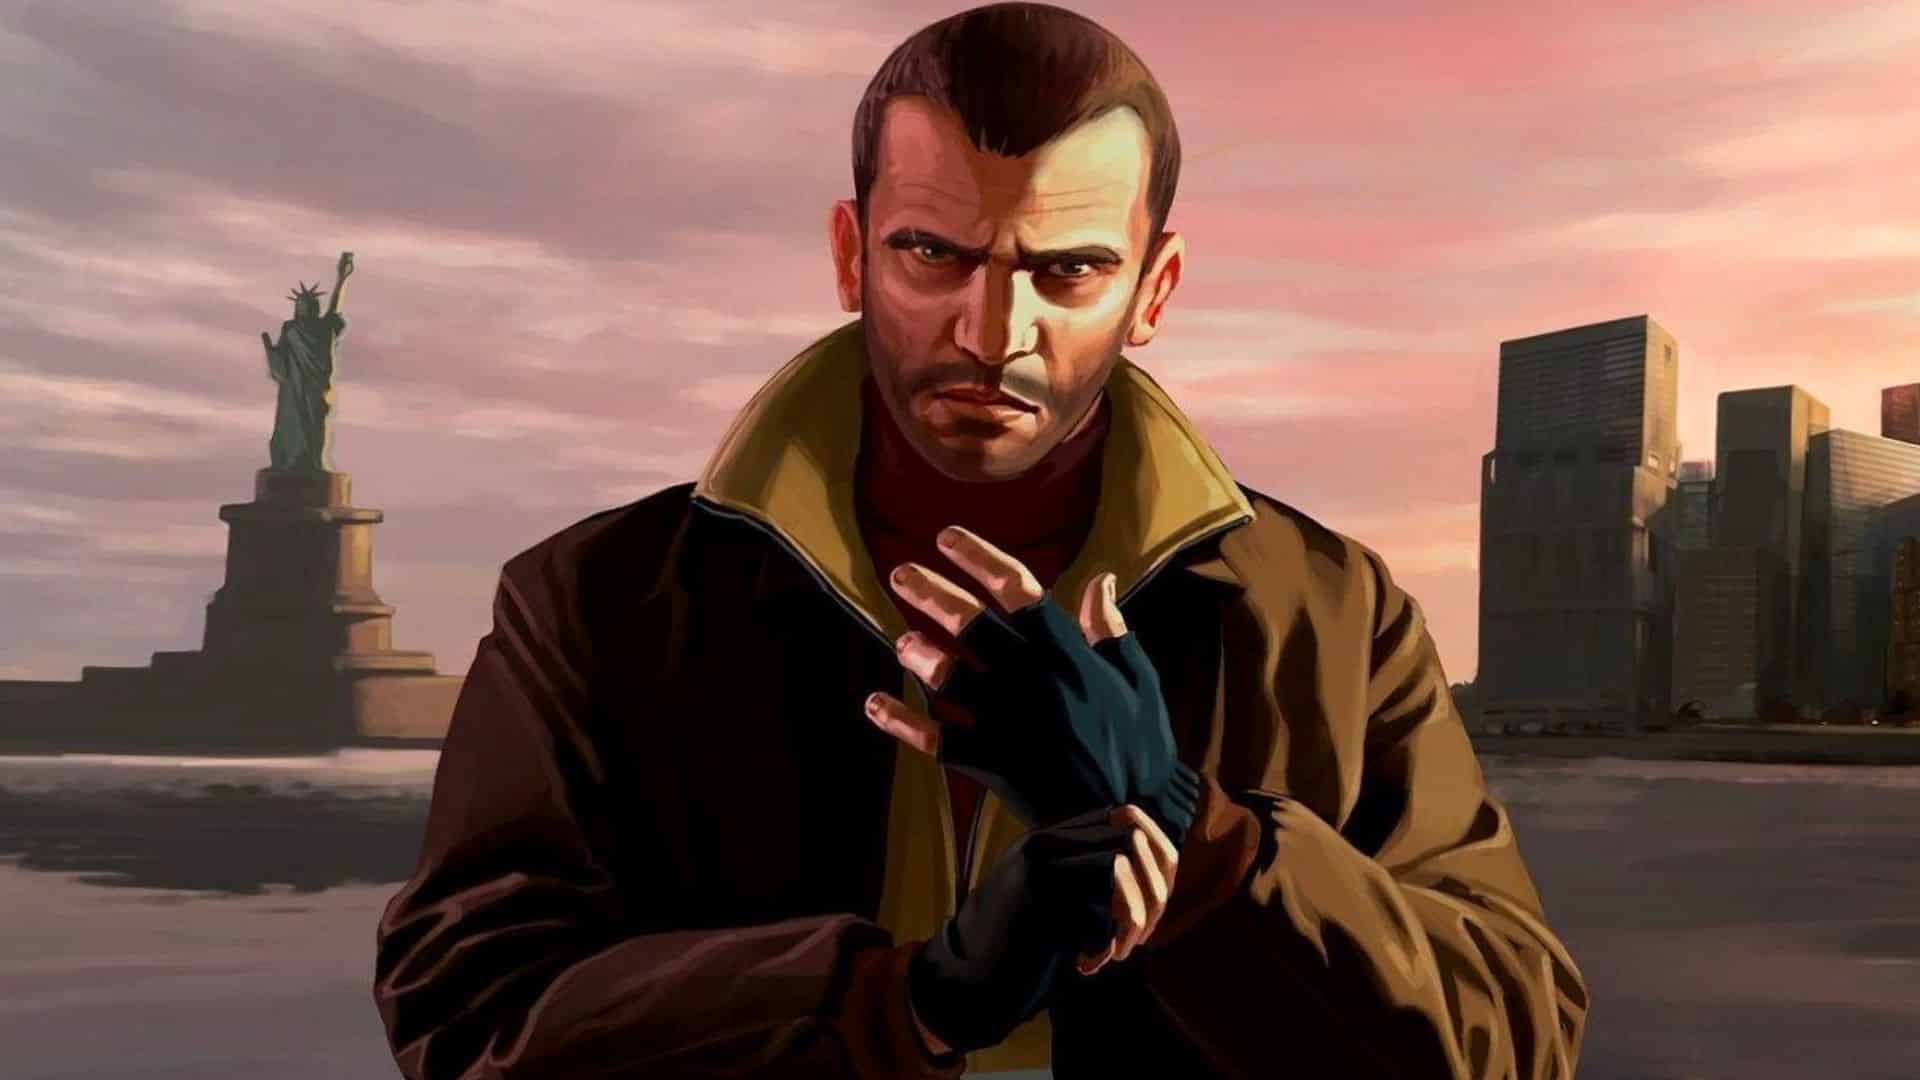 Niko from GTA IV posting in from of Statue of Liberty